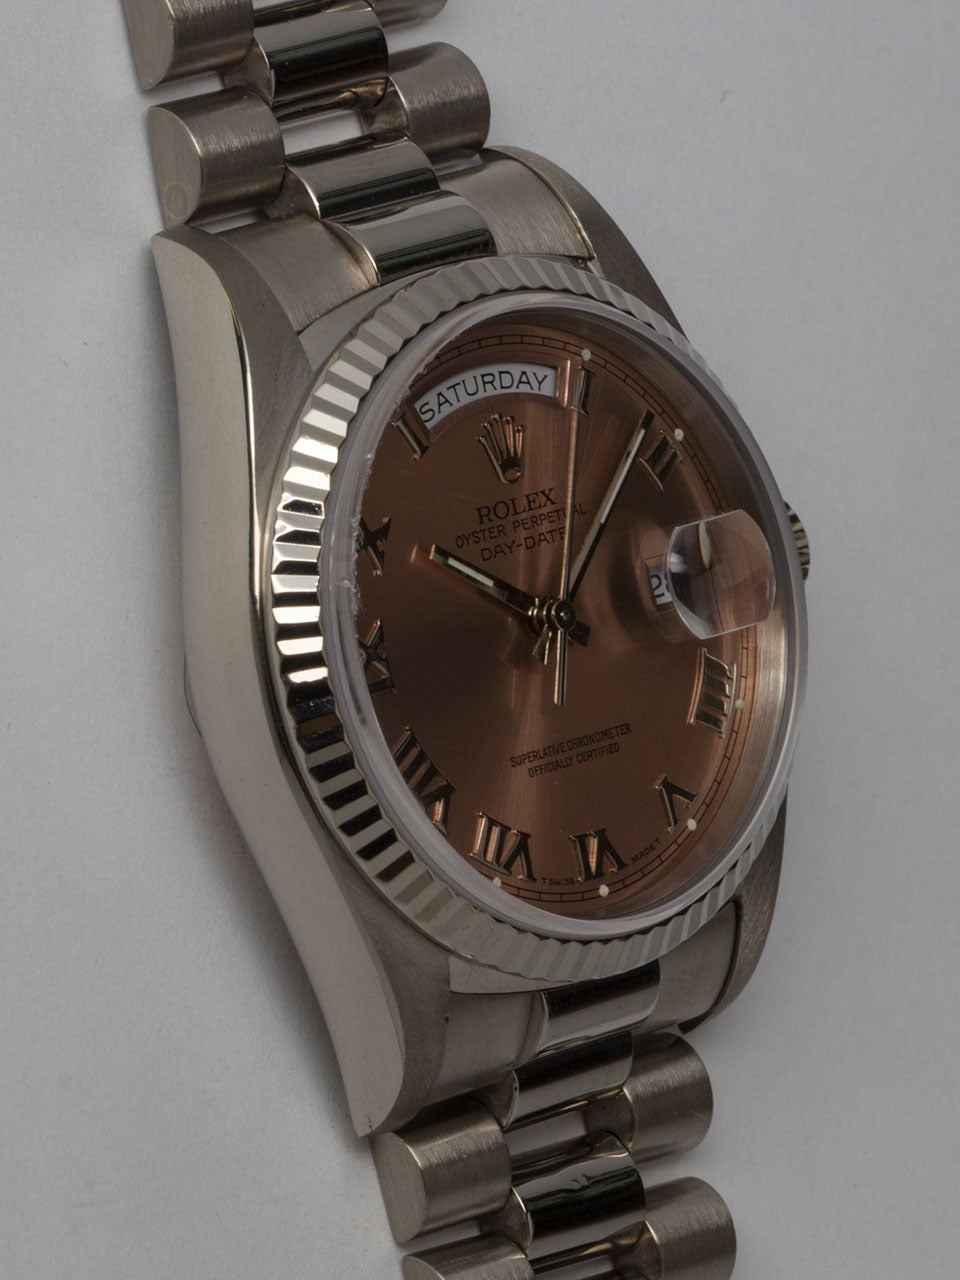 Rolex 18K White Gold Day-Date President Wristwatch ref 18239 serial #L6 circa 1988. 36mm diameter case with 18K white gold fluted bezel and sapphire crystal. With original salmon dial with heavy Roman figures and silver baton hands. Powered by self